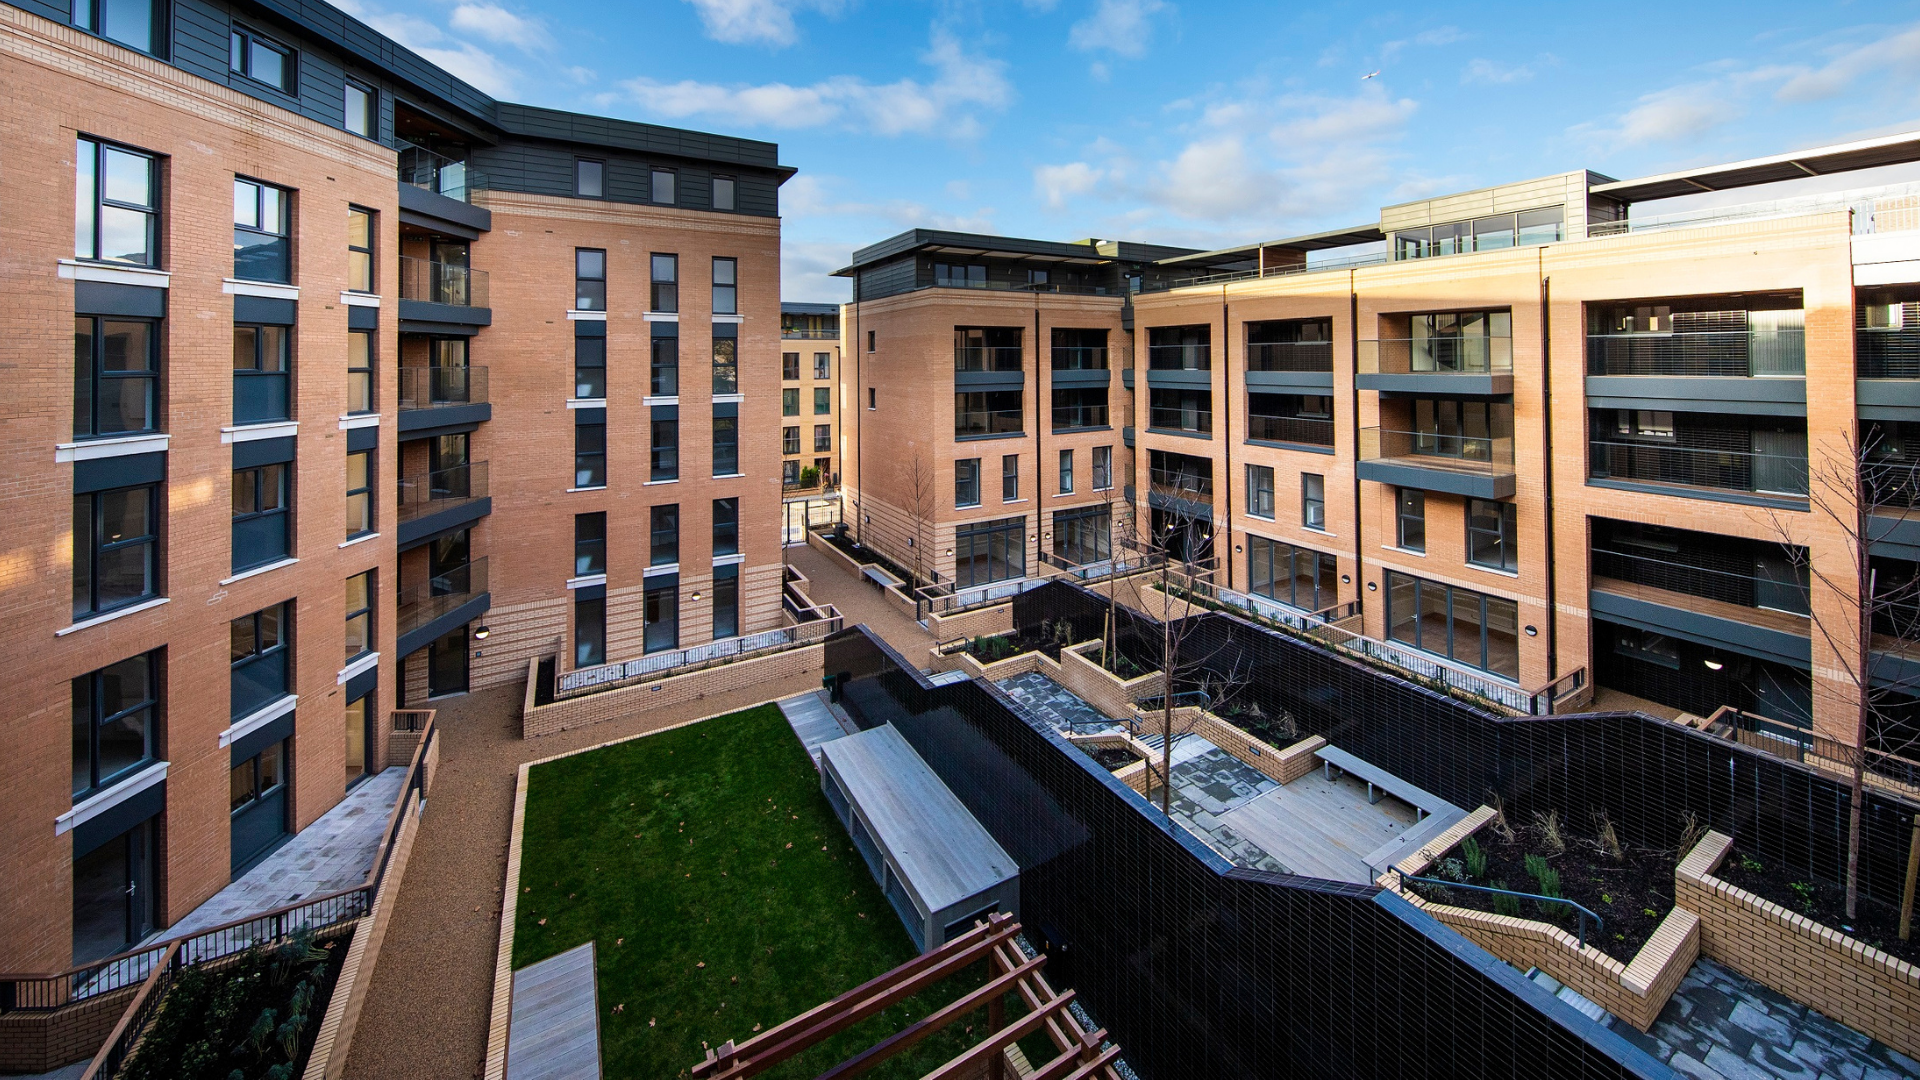 Shared ownership properties at Clapham Park Courtyard. Image credit: Supplied